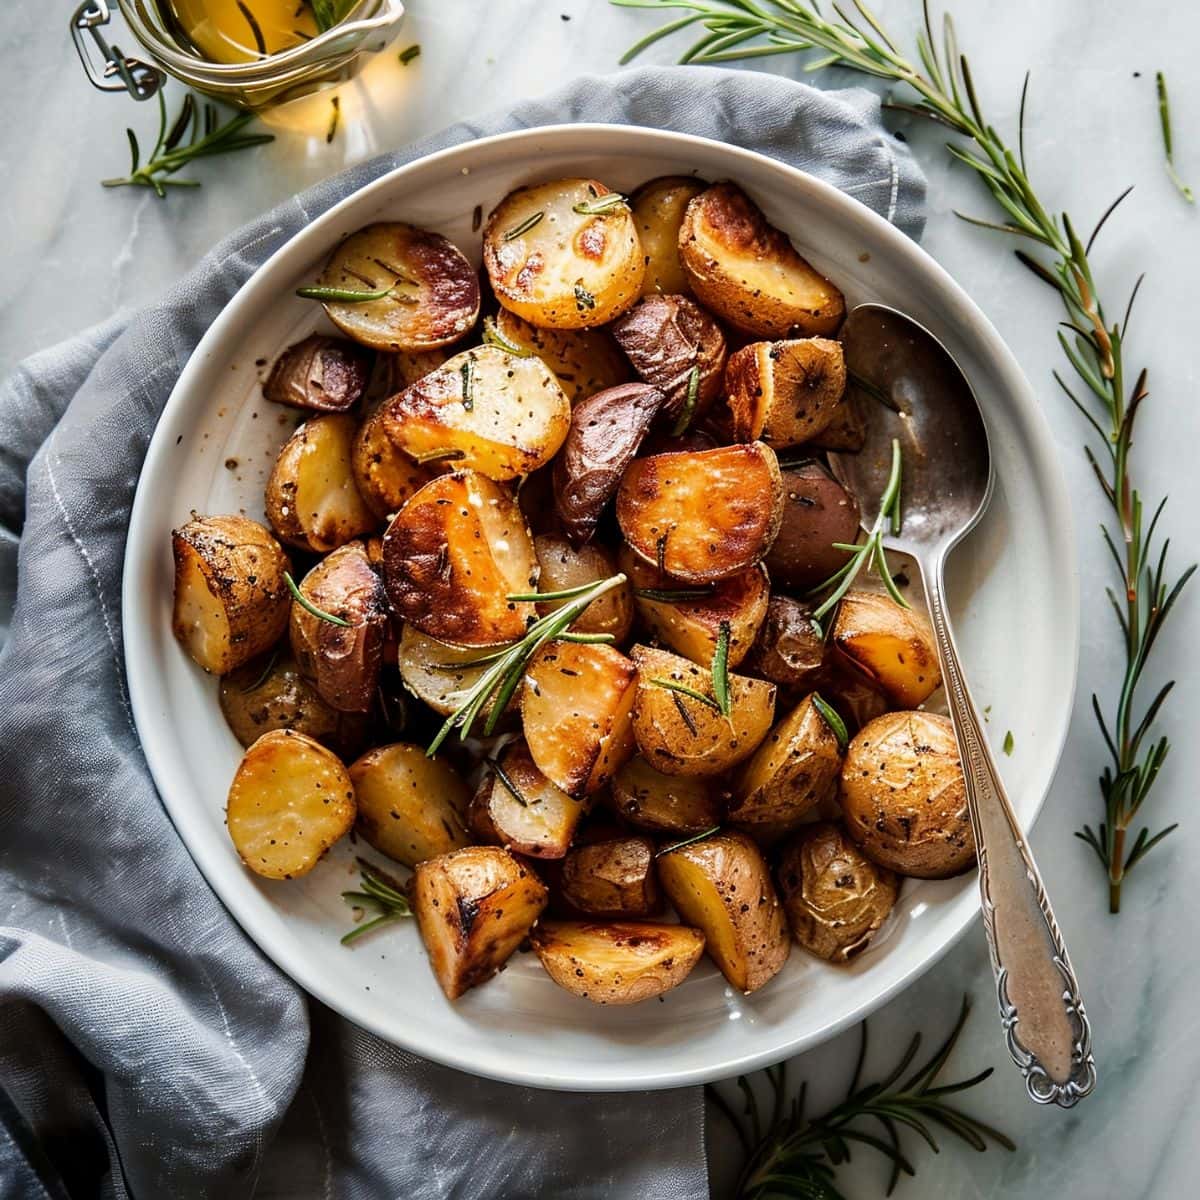 Top View of Roasted Rosemary Potatoes on a White Plate with A Spoon and Sprigs of Rosemary on a White Marble Table